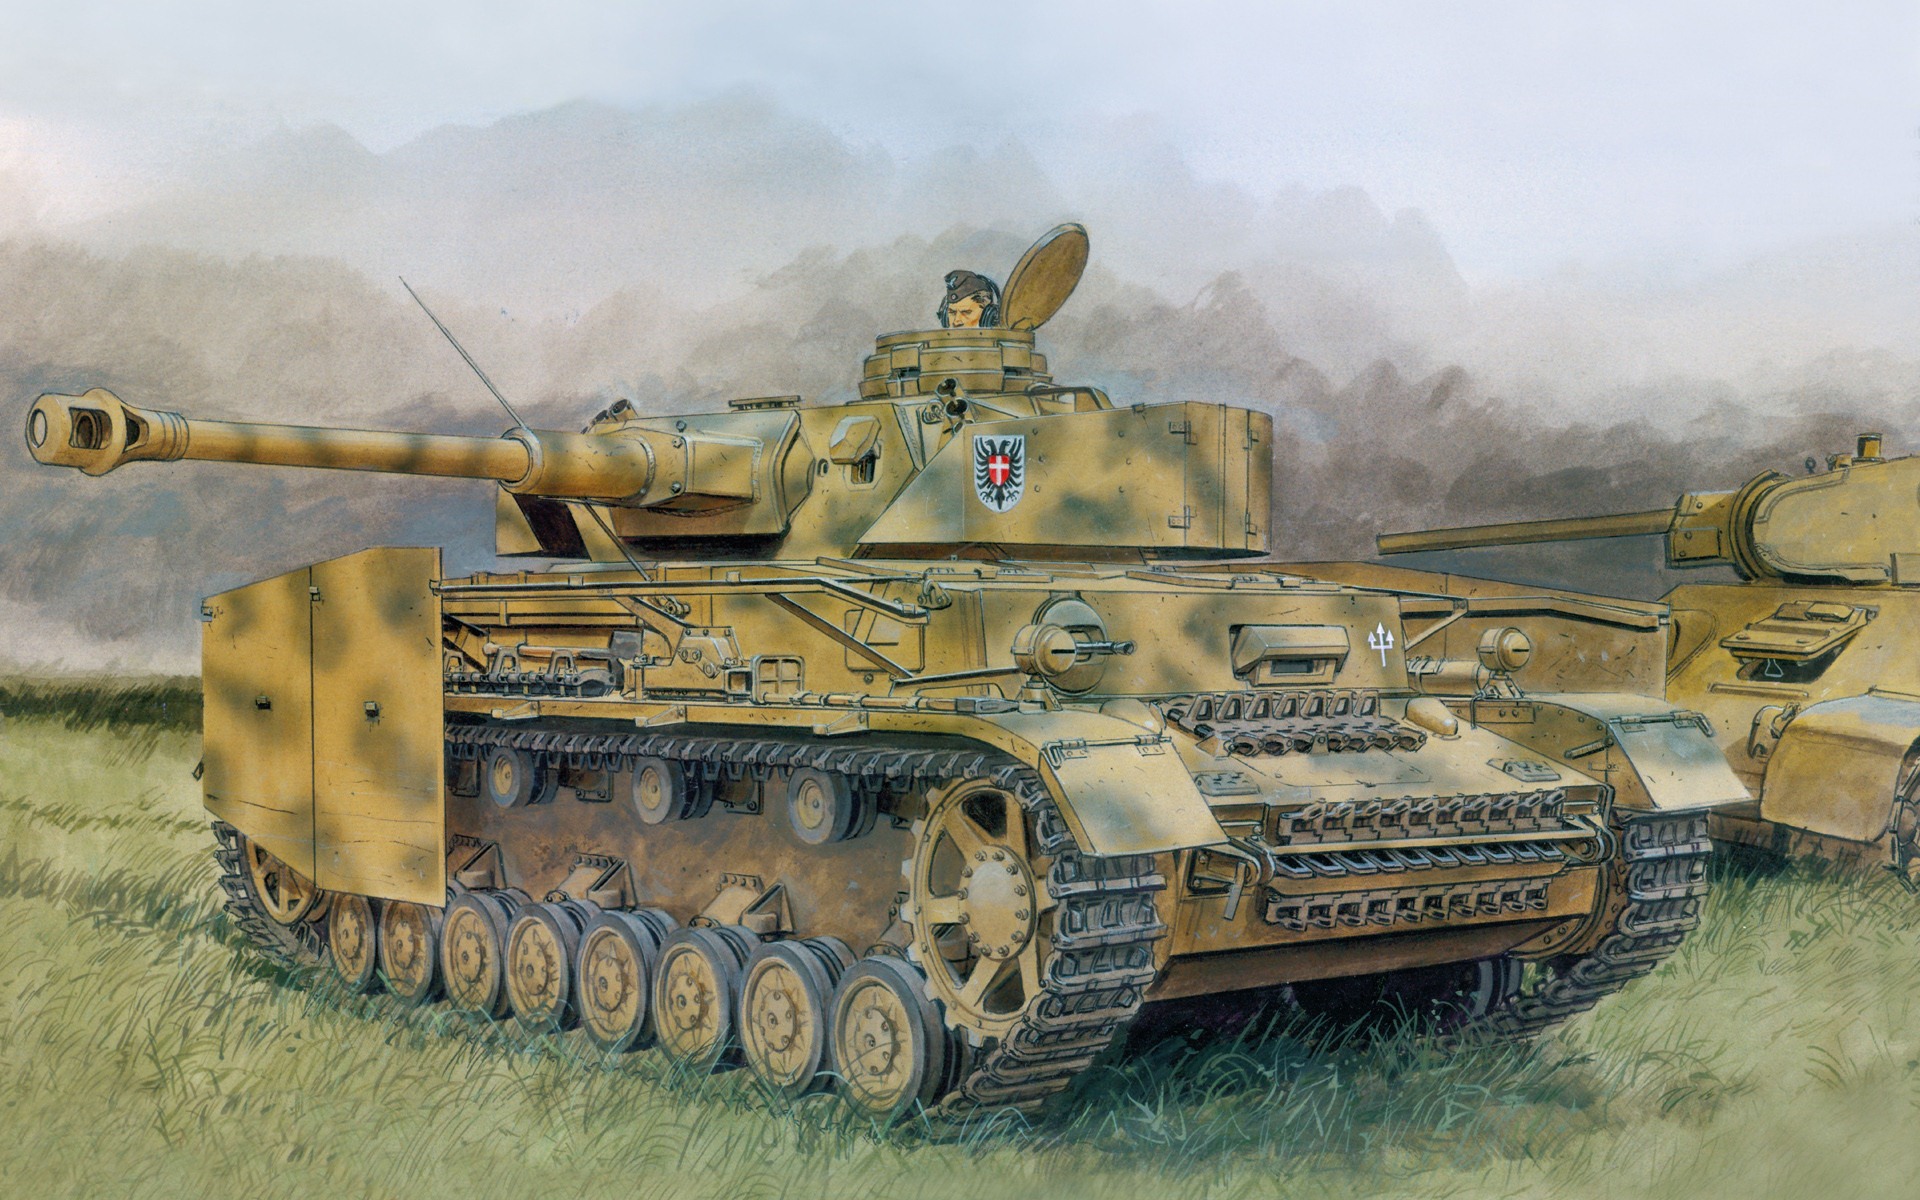 Military tanks, armored HD painting wallpapers #14 - 1920x1200